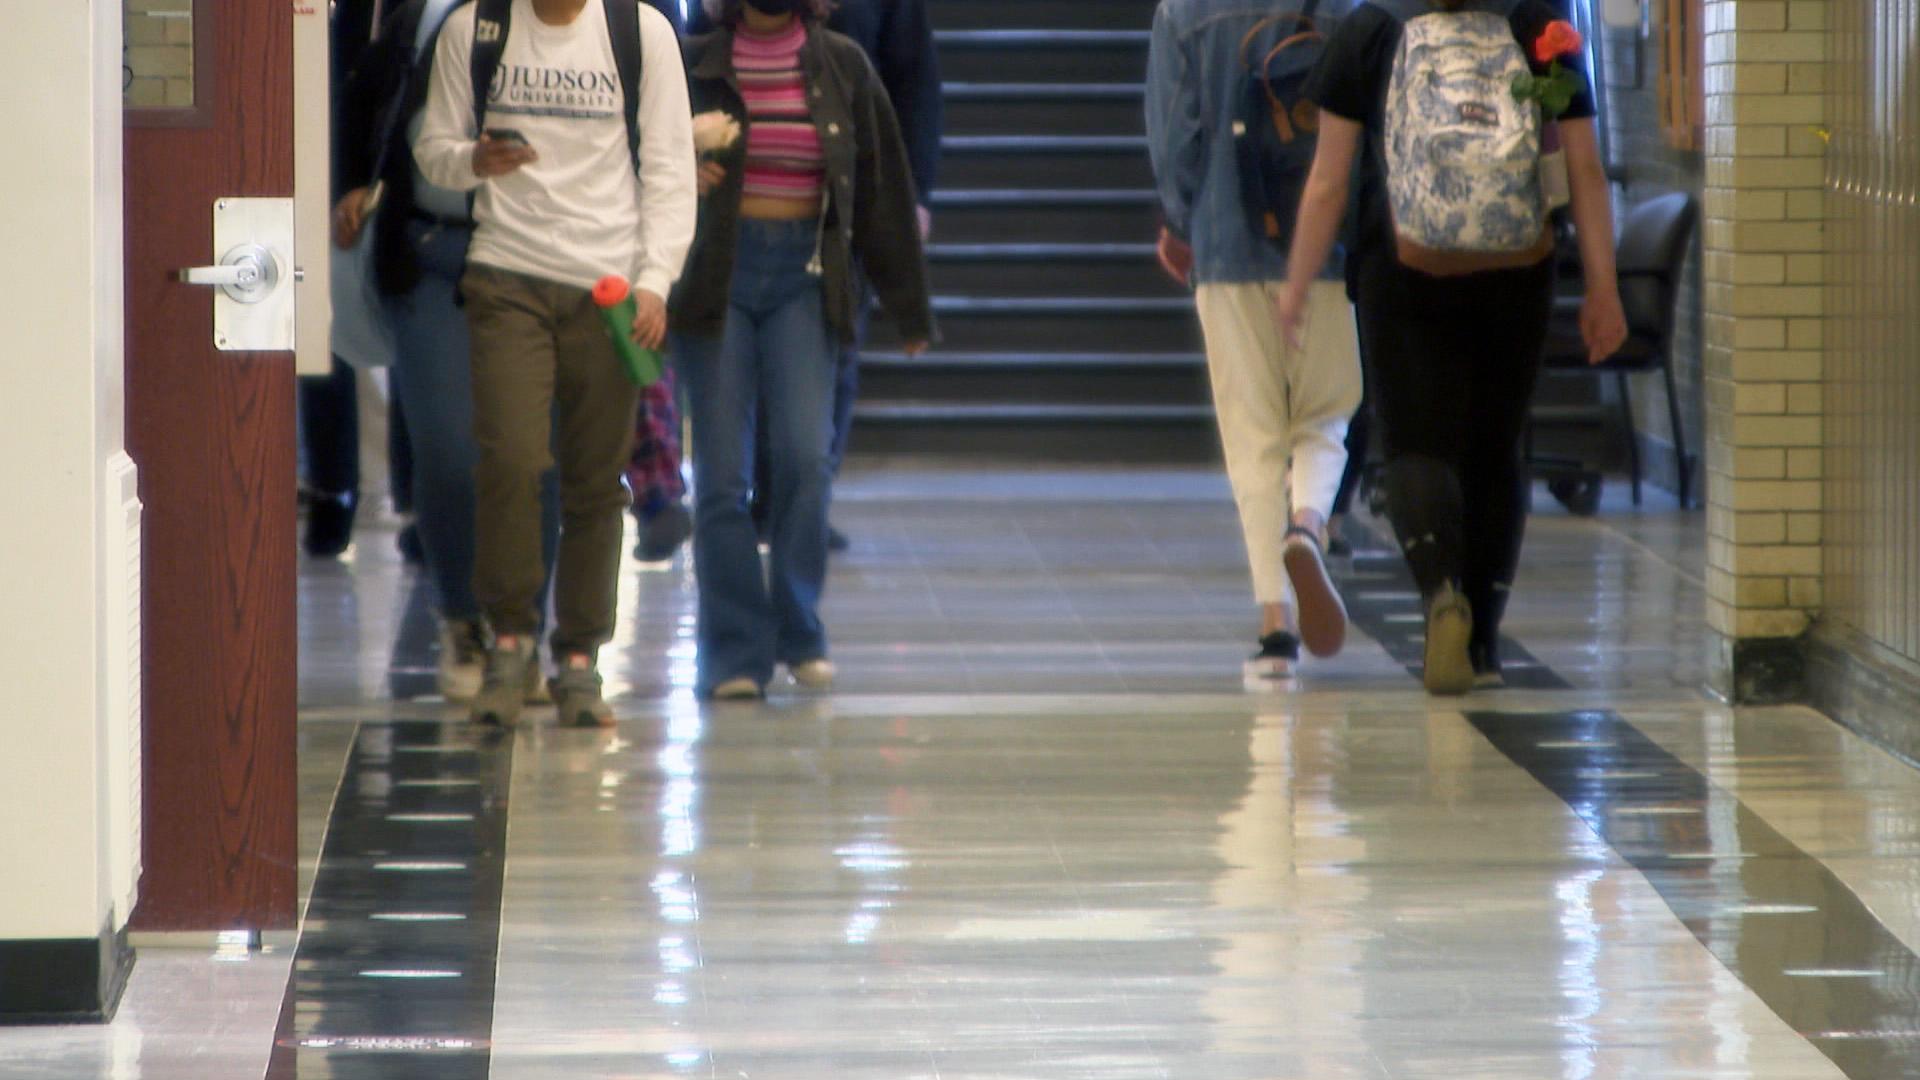 Students at Chicago Public Schools walk along a hallway in this file photo. (WTTW News)